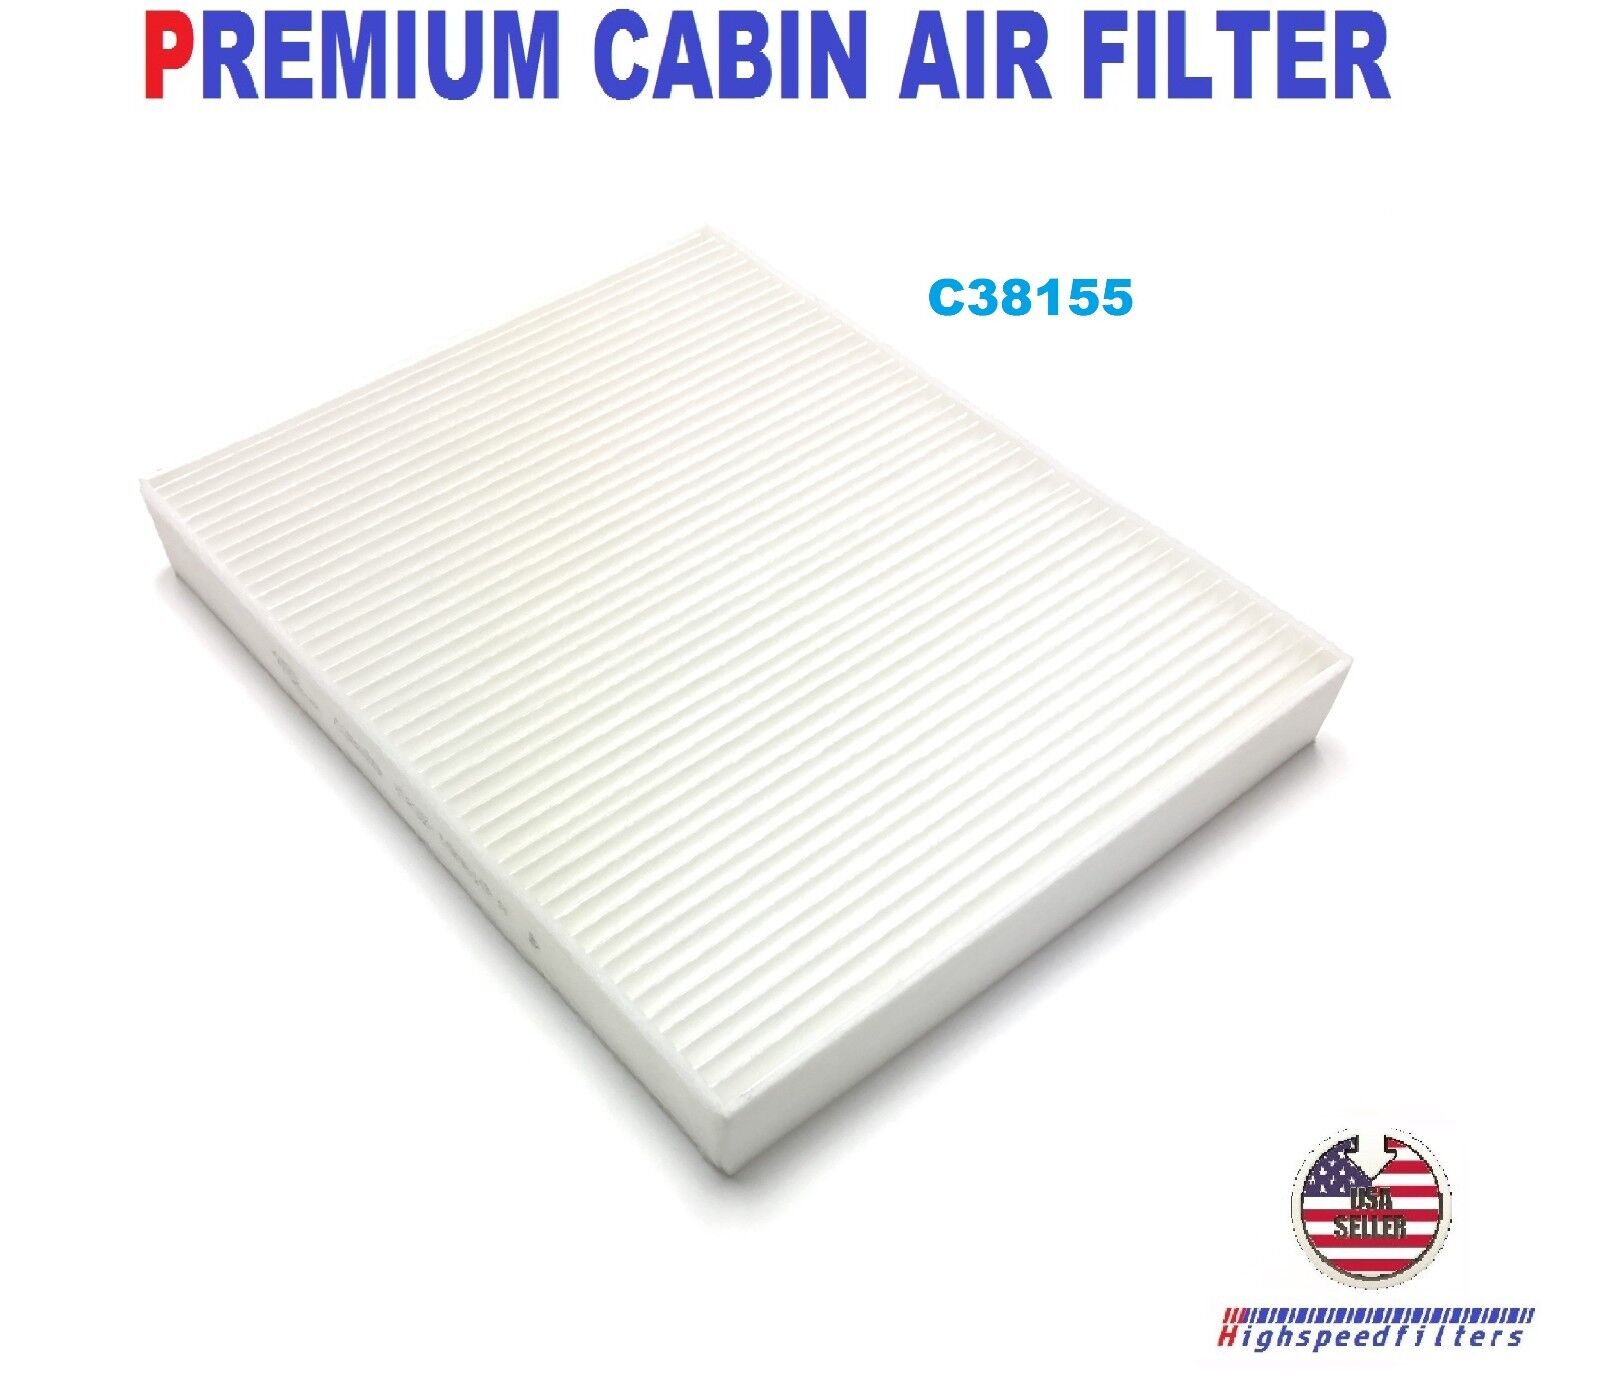 C38155 PREMIUM QUALITY CABIN AIR FILTER For 2015 - 2020 FORD MUSTANG FP78